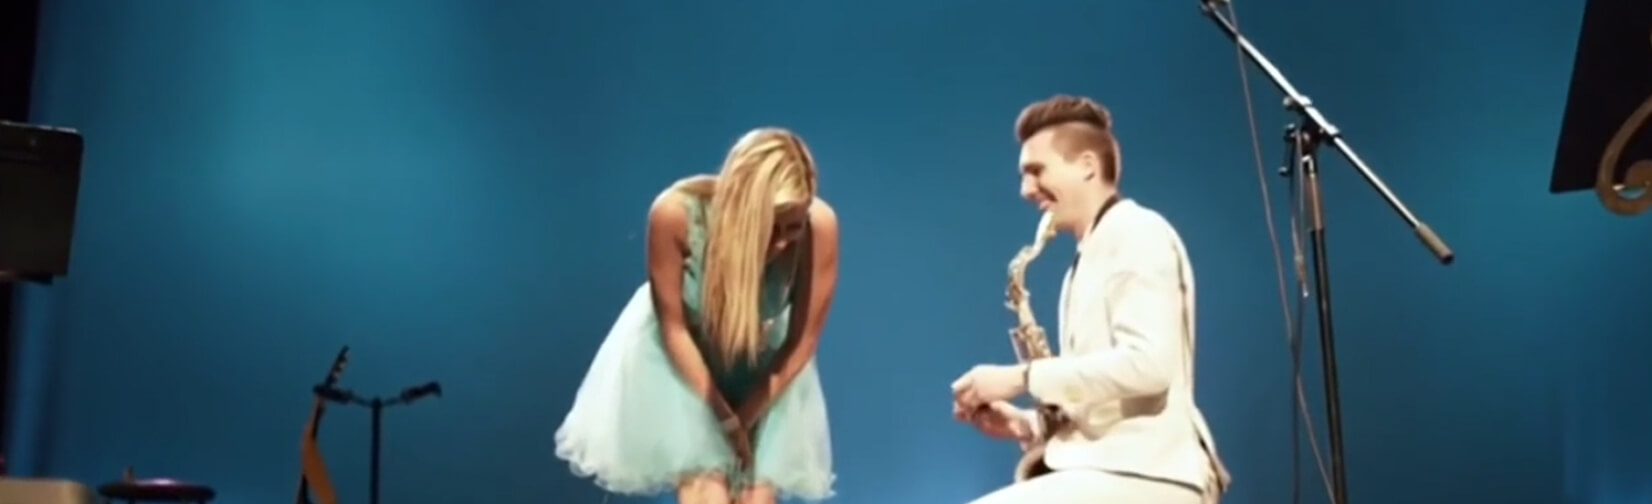 Husband-to-be pops question to Manitoba violinist in show-stopping proposal